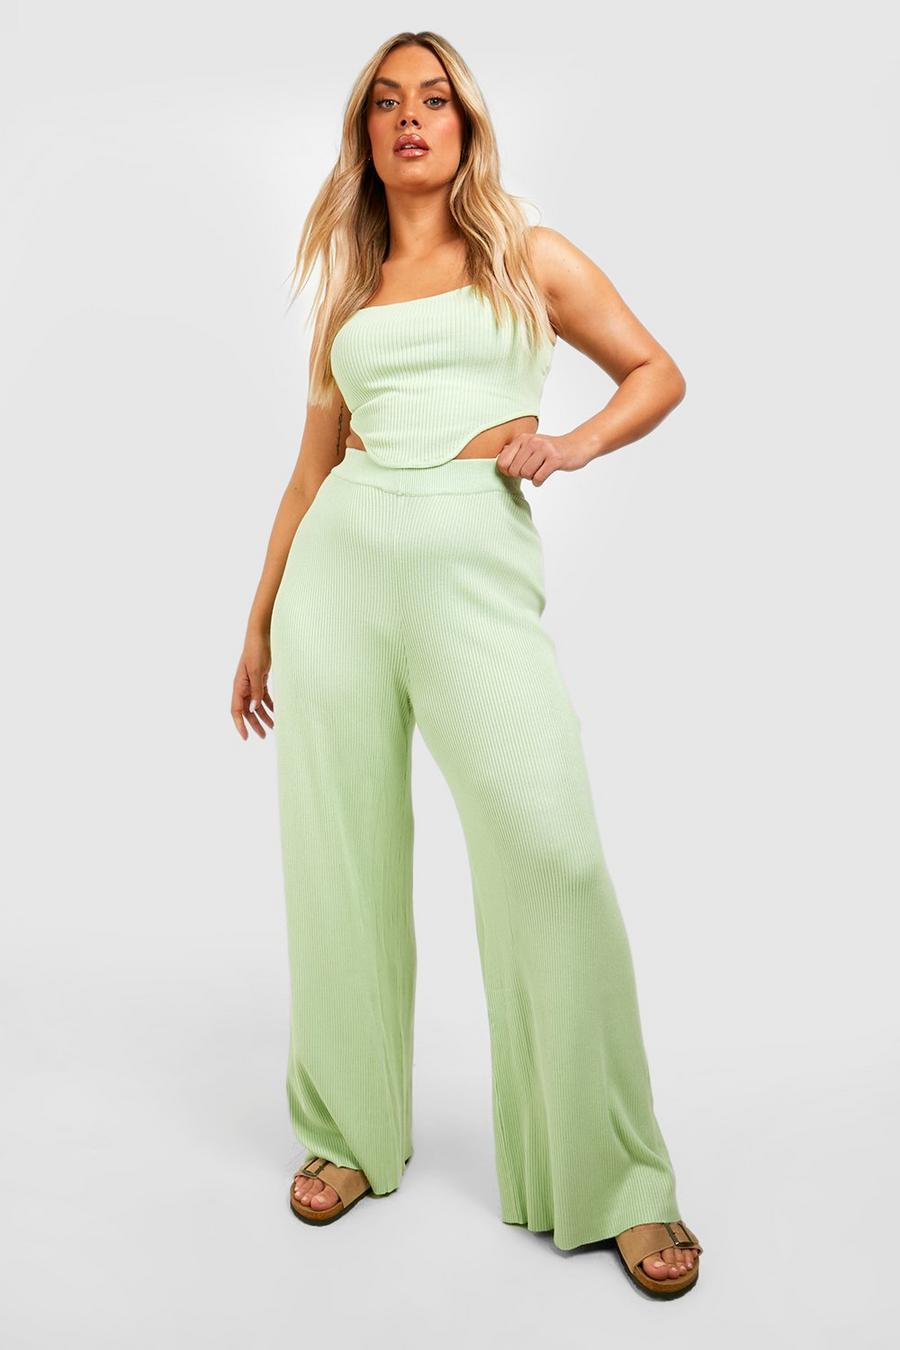 Mint green Plus Knit Corset Crop Top And Wide Leg Pants image number 1